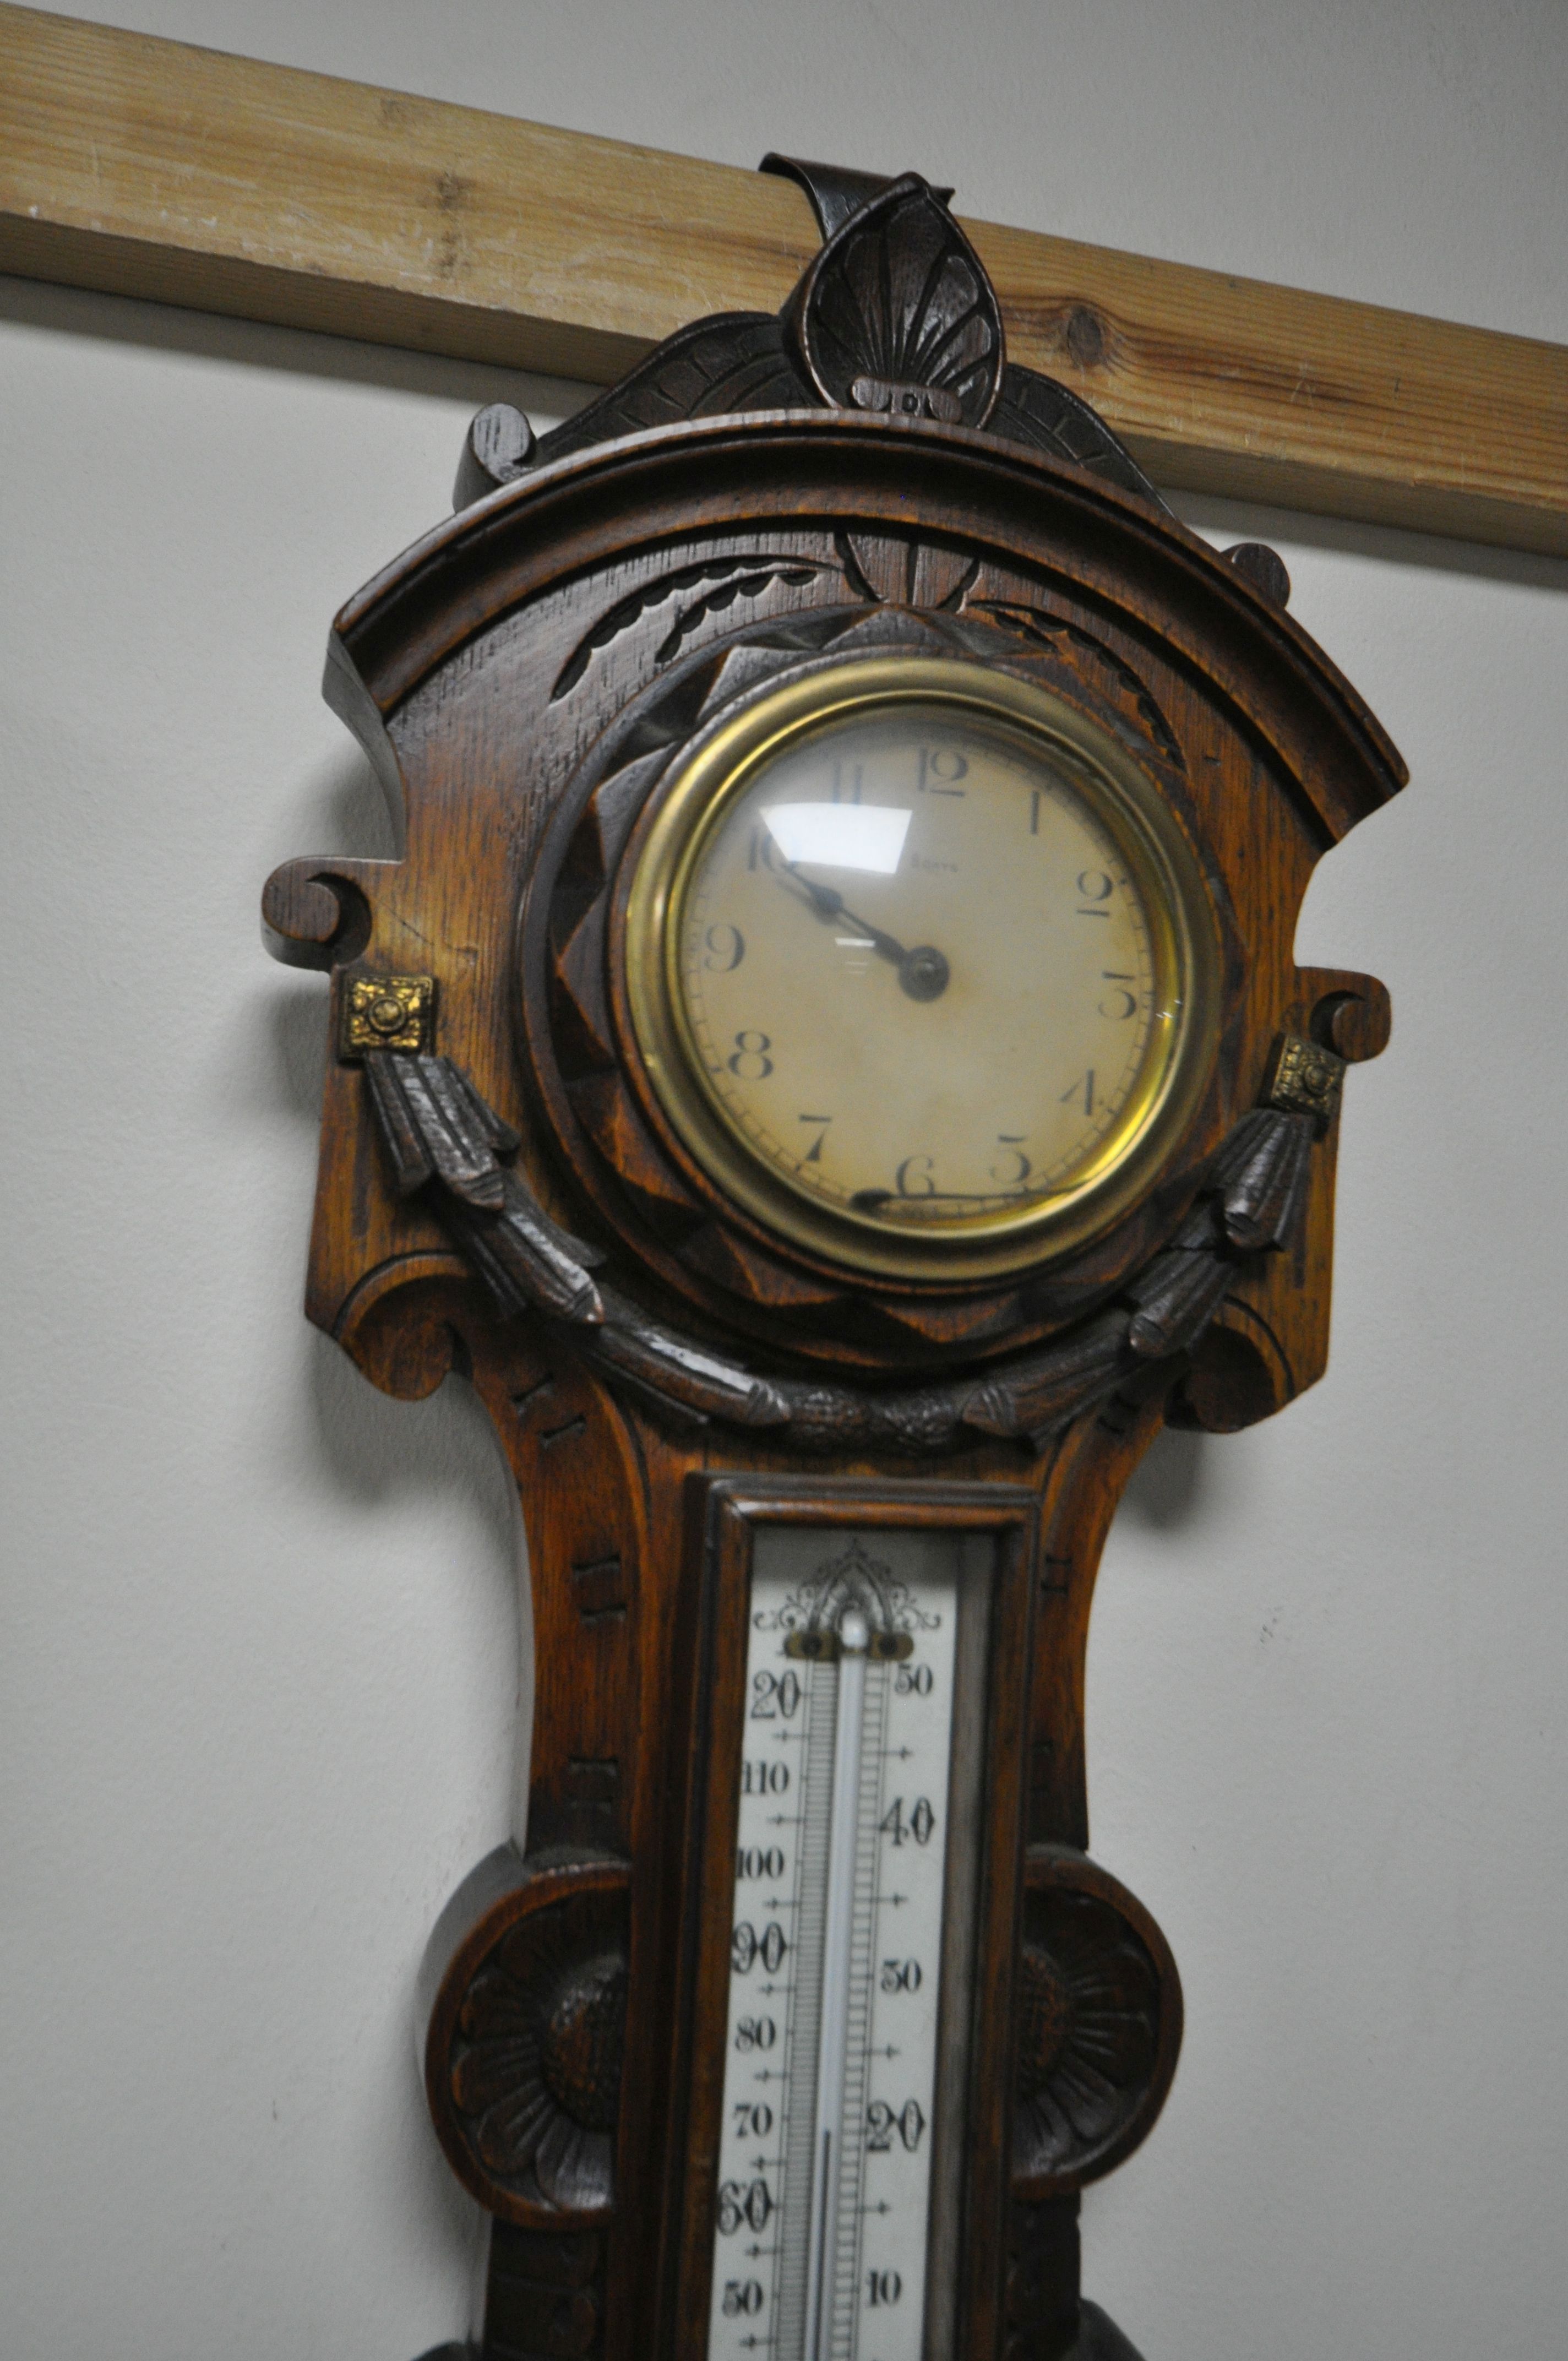 TWO LATE 19TH/EARLY 20TH CENTURY CARVED OAK ANEROID BAROMETERS, with clock dials and thermometers, - Image 4 of 5